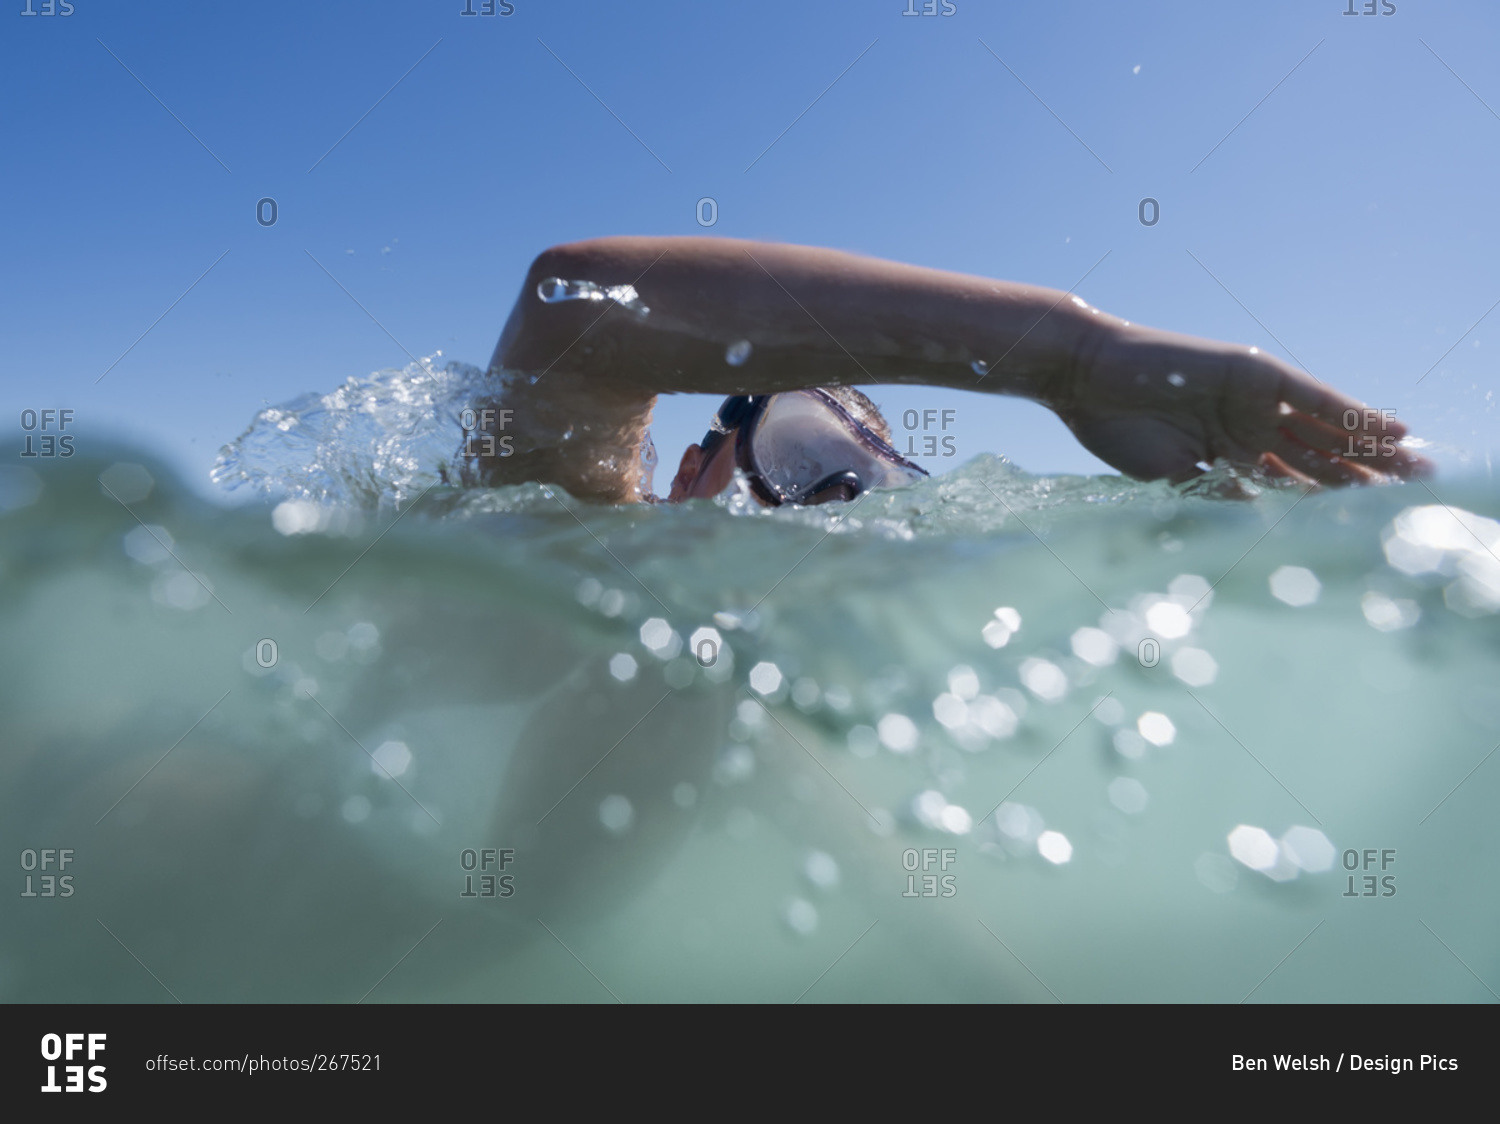 A person swimming with goggles on the surface of the water, Tarifa, Cadiz, Andalusia, Spain